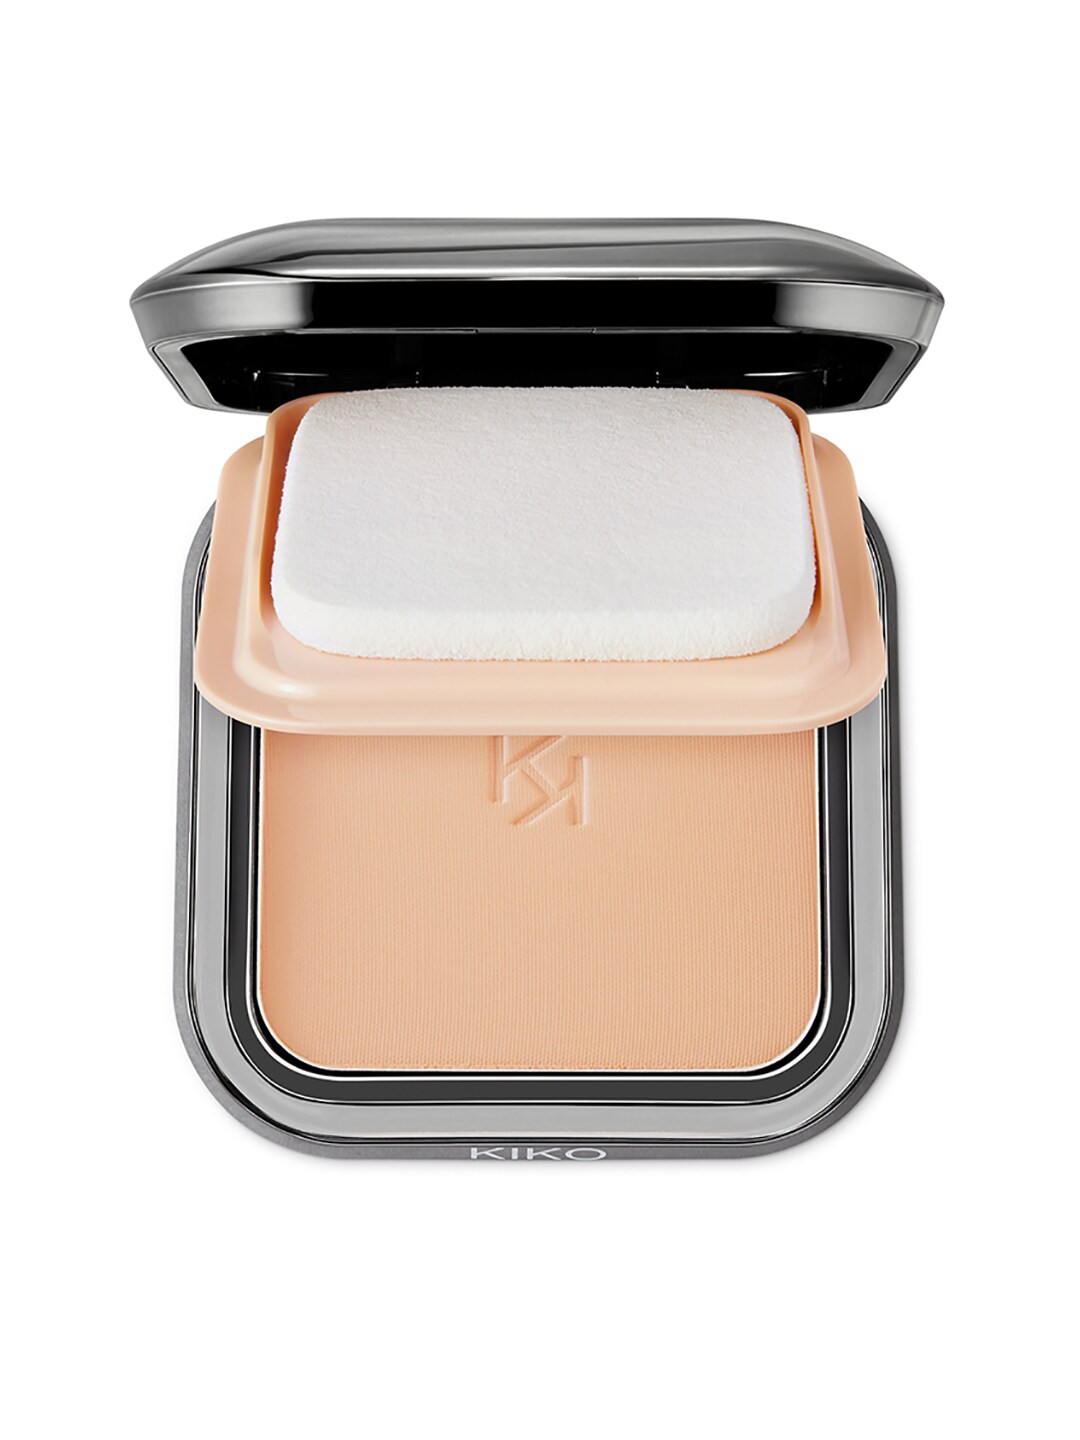 KIKO MILANO Weightless Perfection SPF 30 Wet and Dry Powder Foundation N60 Price in India